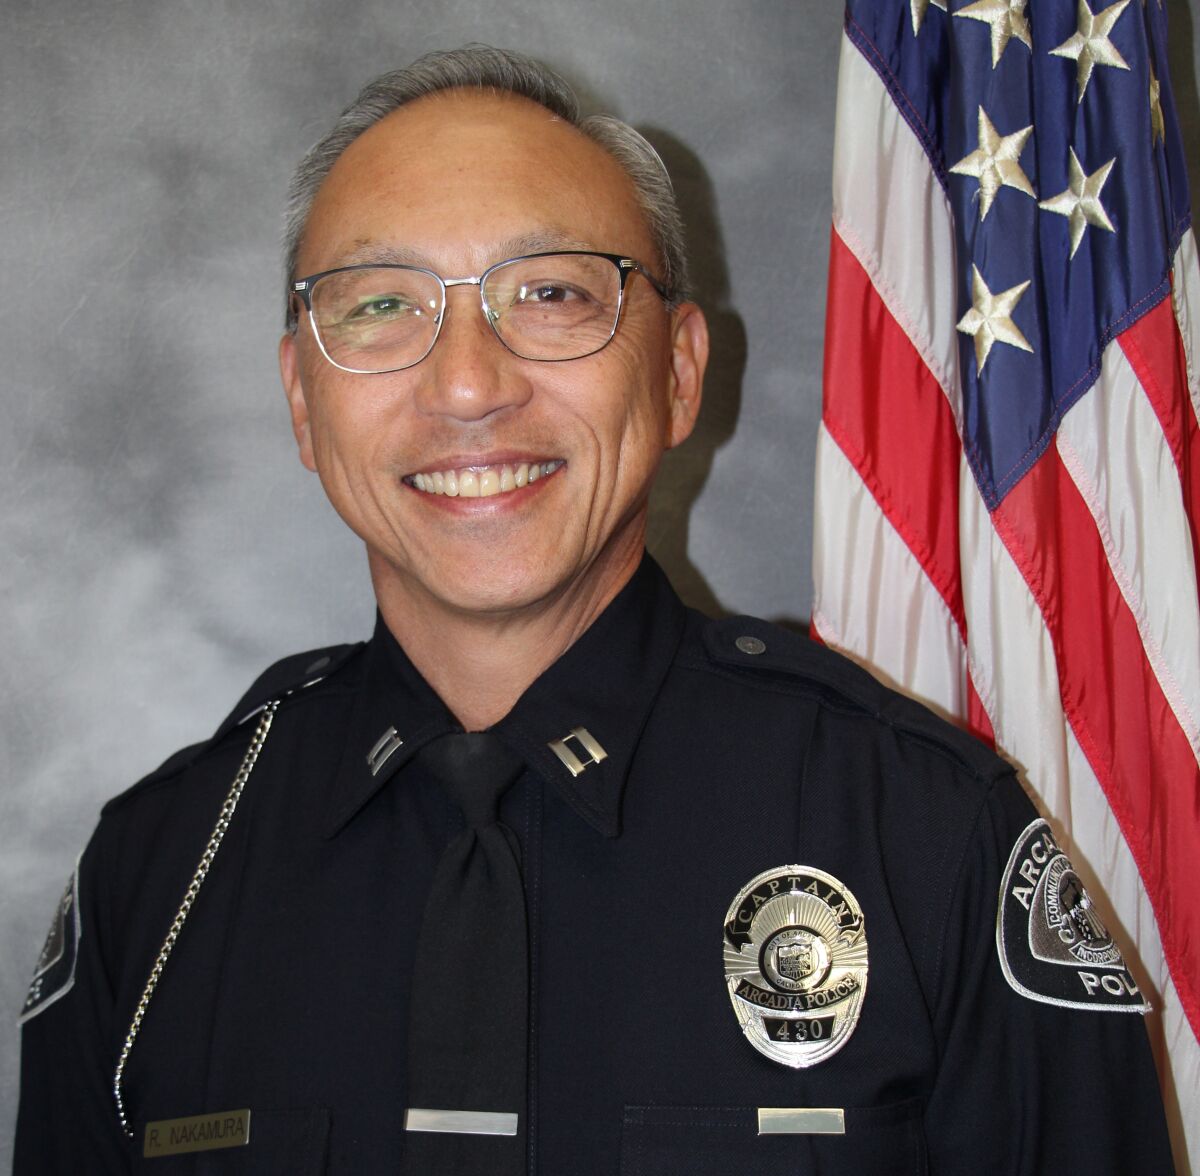 Roy Nakamura will be Arcadia's first police chief of Japanese descent.